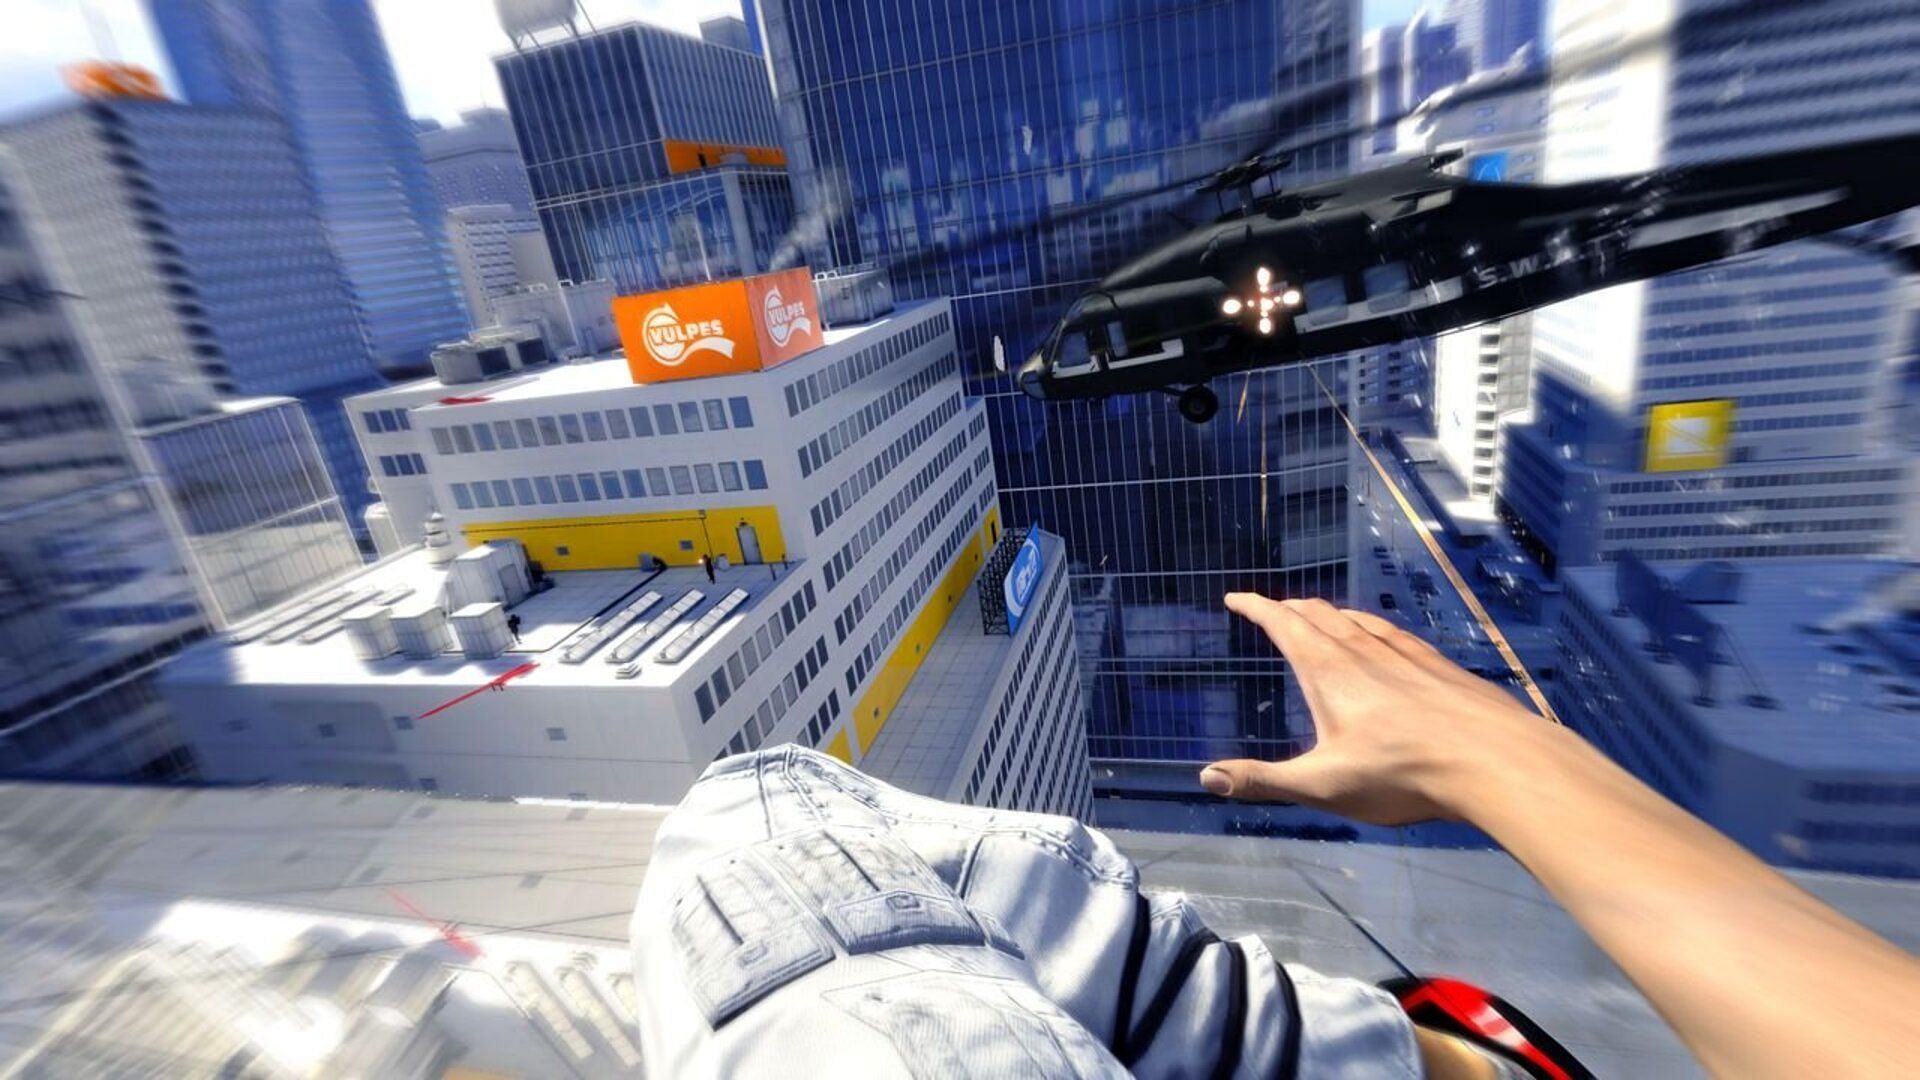 Mirror&#039;s Edge offers an industry favorite first-person parkour experience that contends well as one of the best games like Prince of Persia to try in 2024. (Image via Dice)